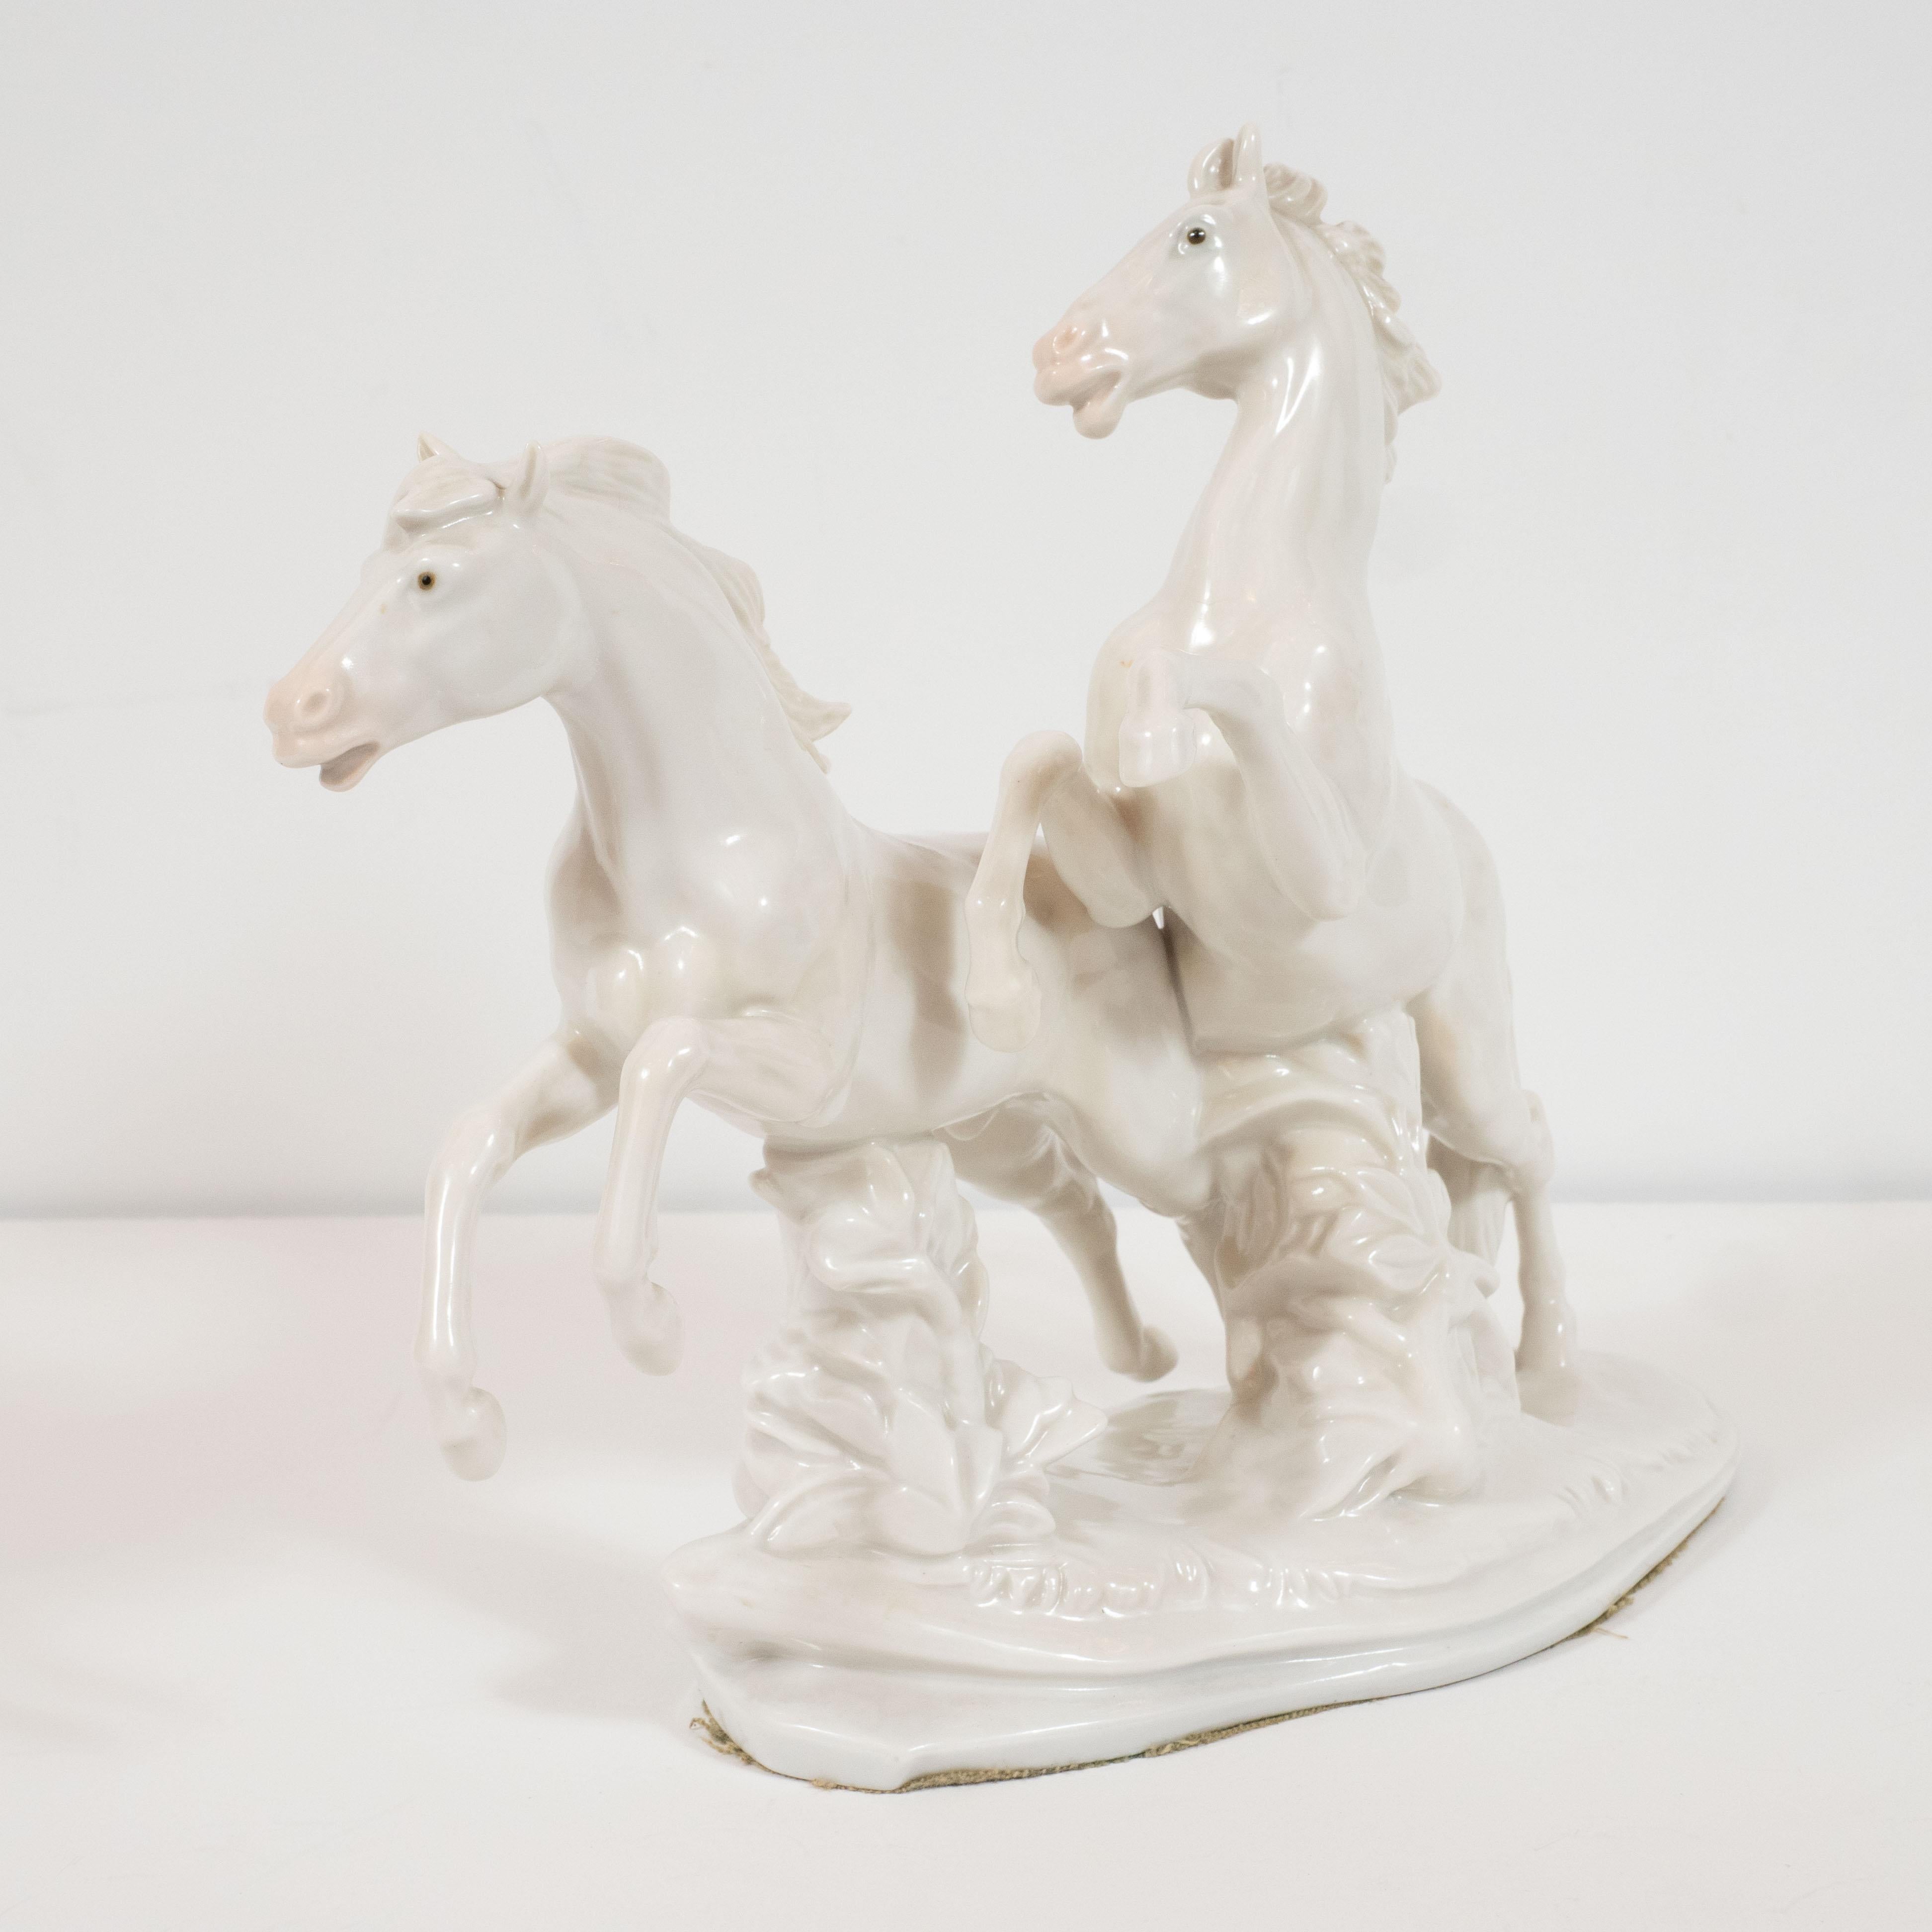 Art Deco White Porcelain Galloping Horse Sculptures Signed by Karl Ens In Excellent Condition For Sale In New York, NY